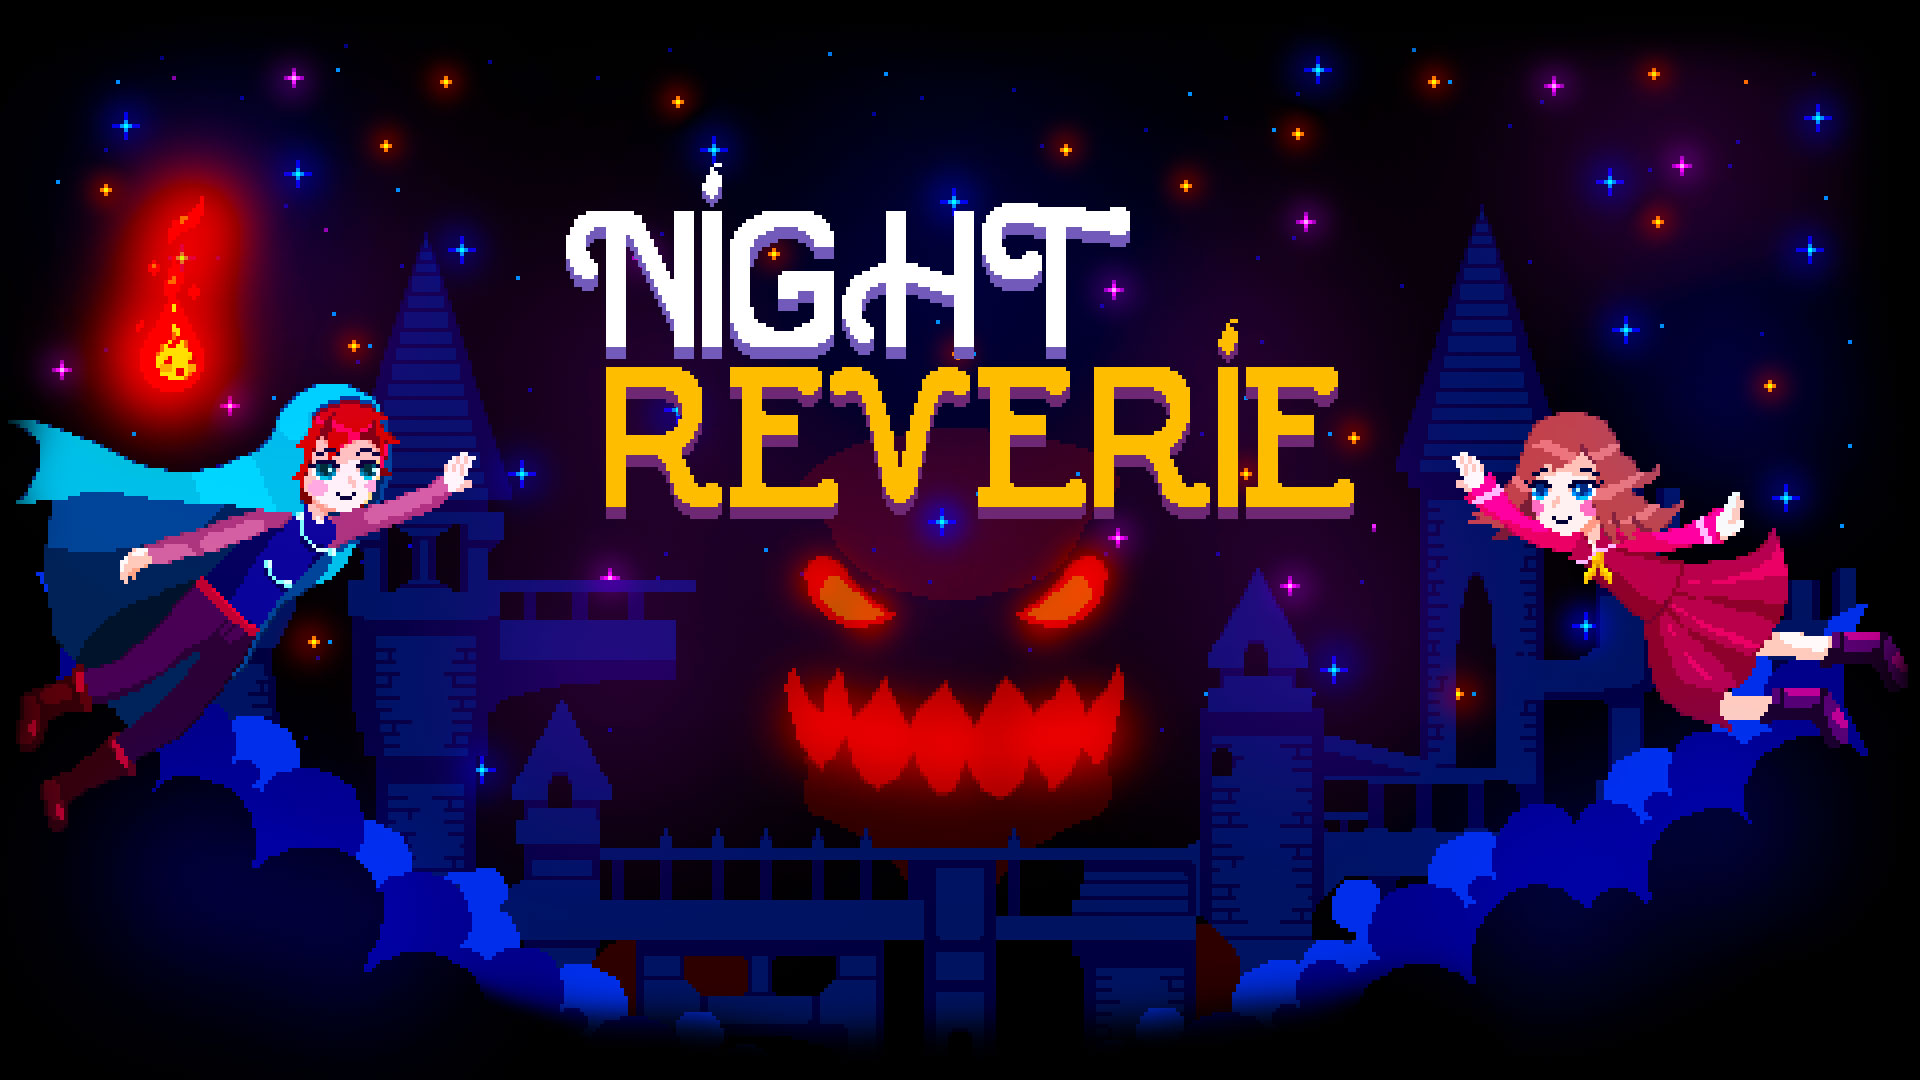 Night Reverie, a Heartwarming Adventure Now Available on Xbox and Windows